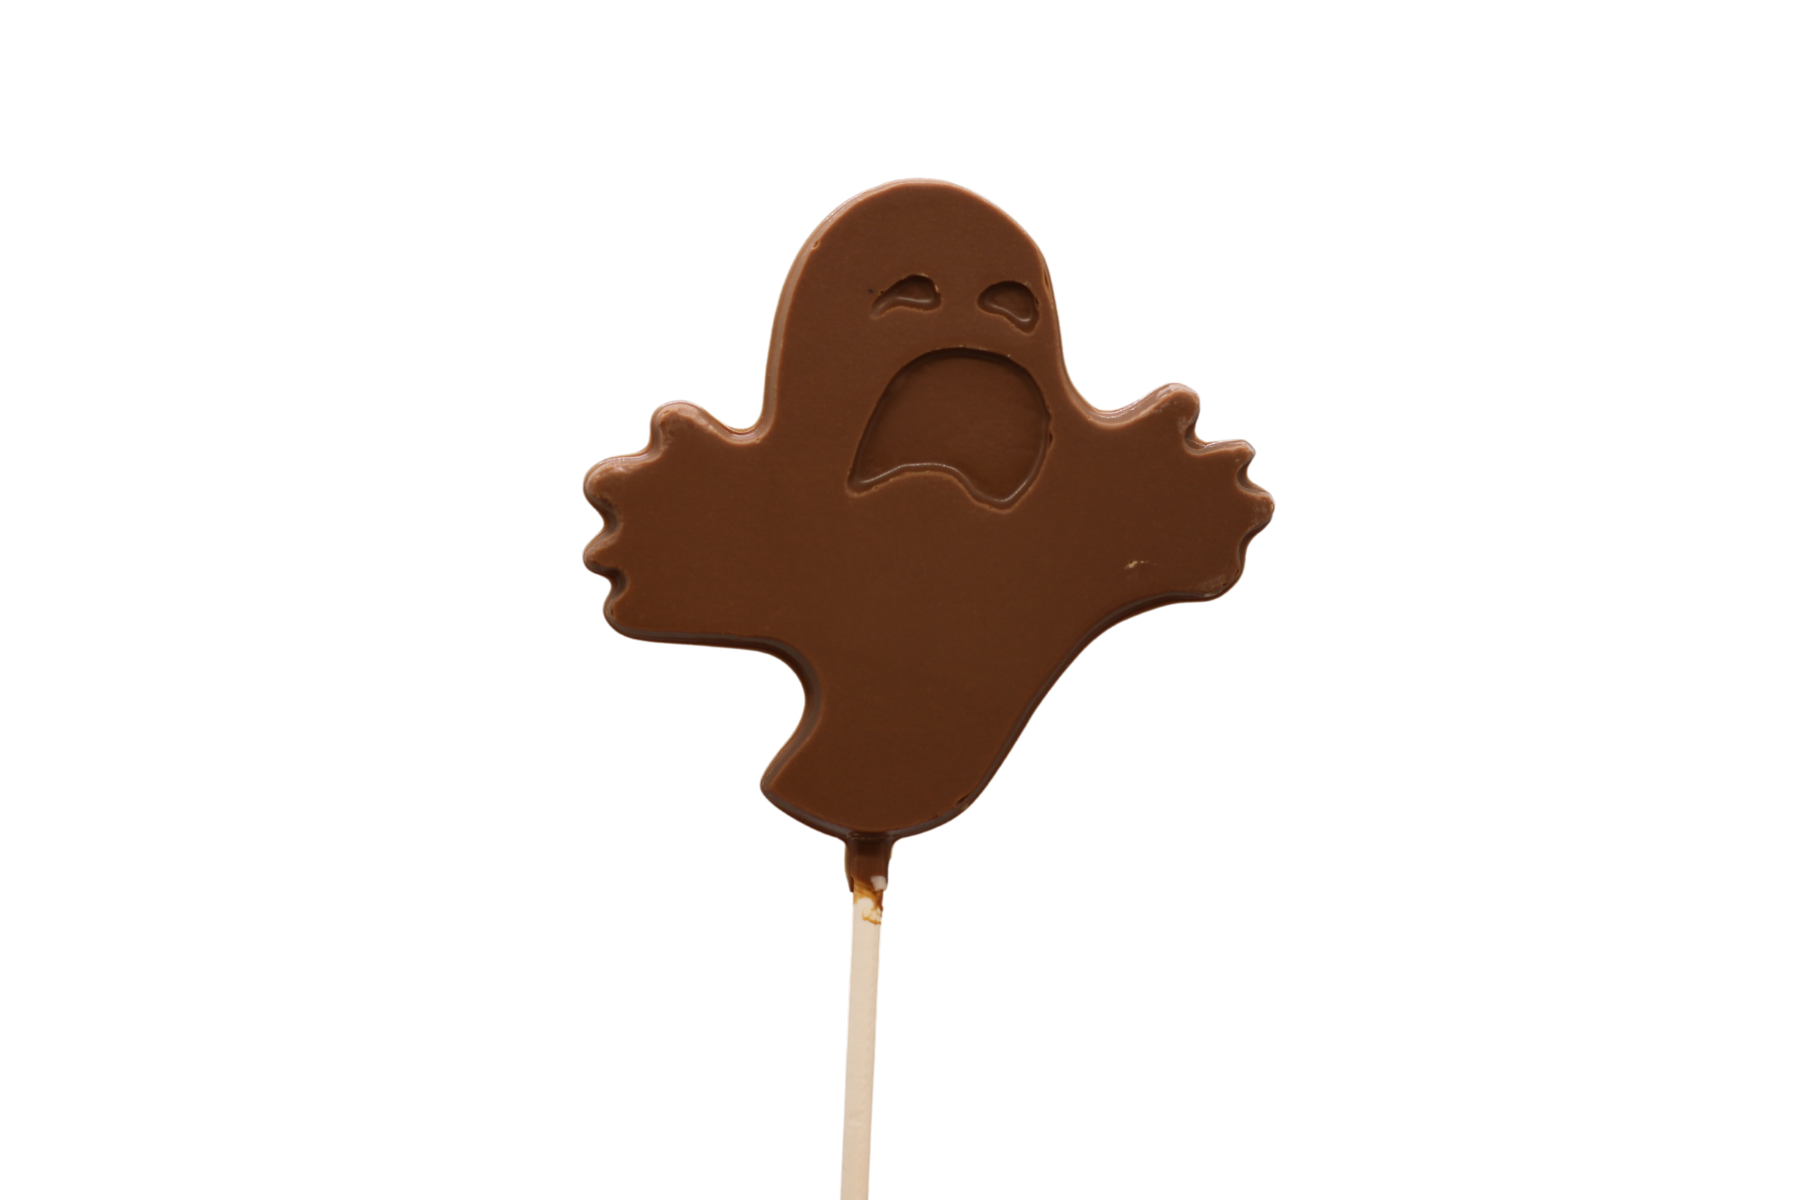 Halloween-Themed Milk Chocolate Pop with Ghost Silhouette - The perfect party favor for a spooky and sweet celebration!